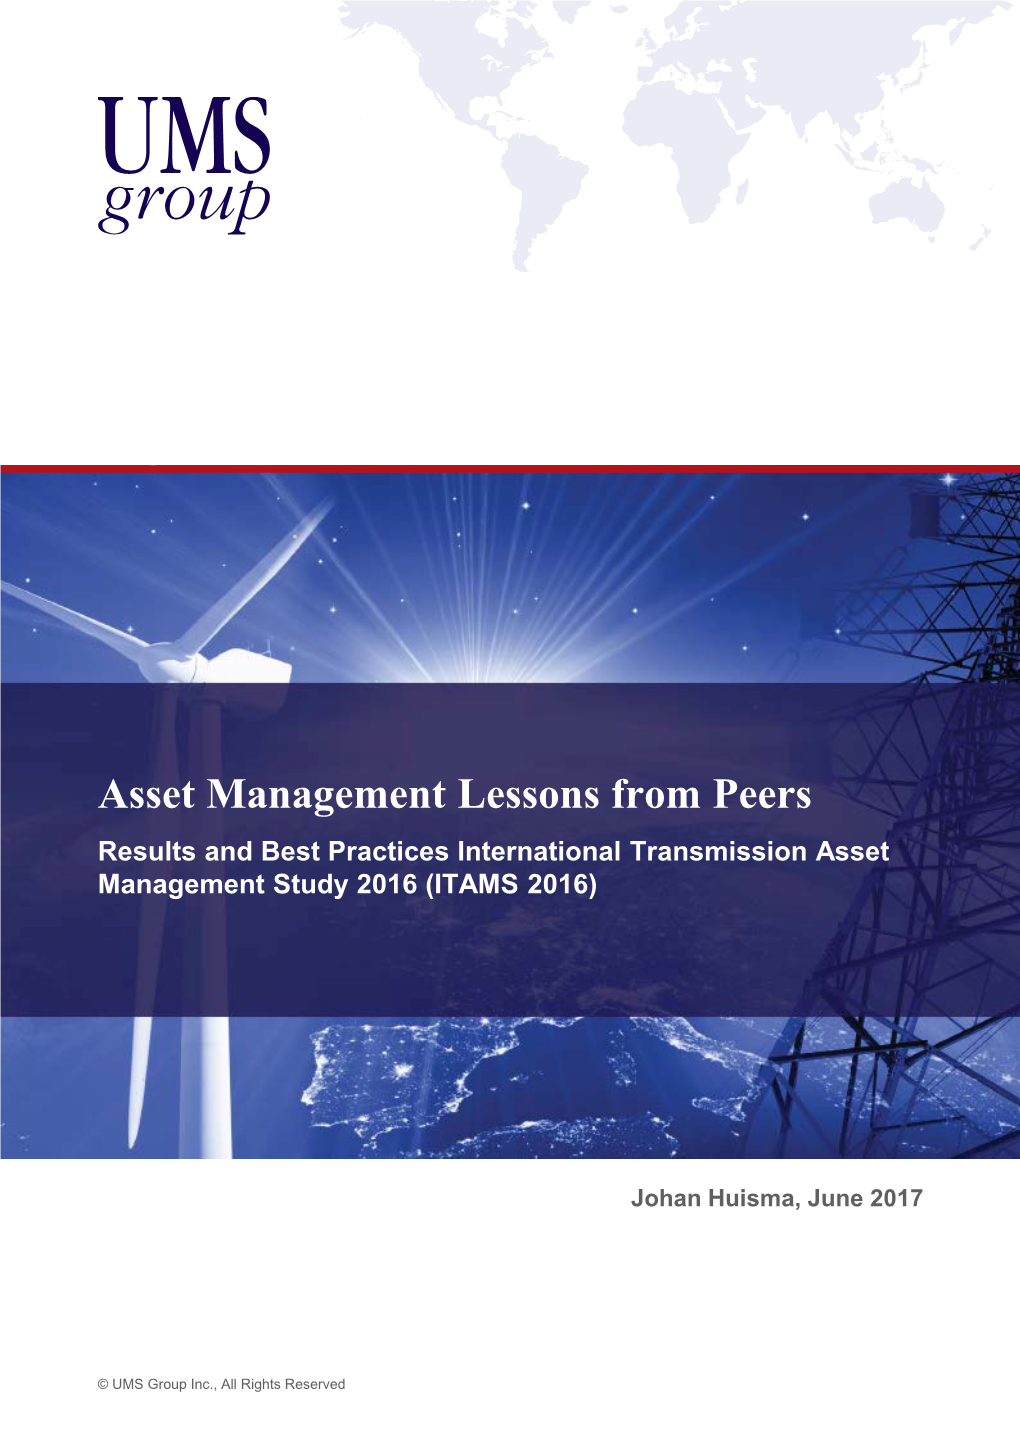 Asset Management Lessons from Peers Results and Best Practices International Transmission Asset Management Study 2016 (ITAMS 2016)